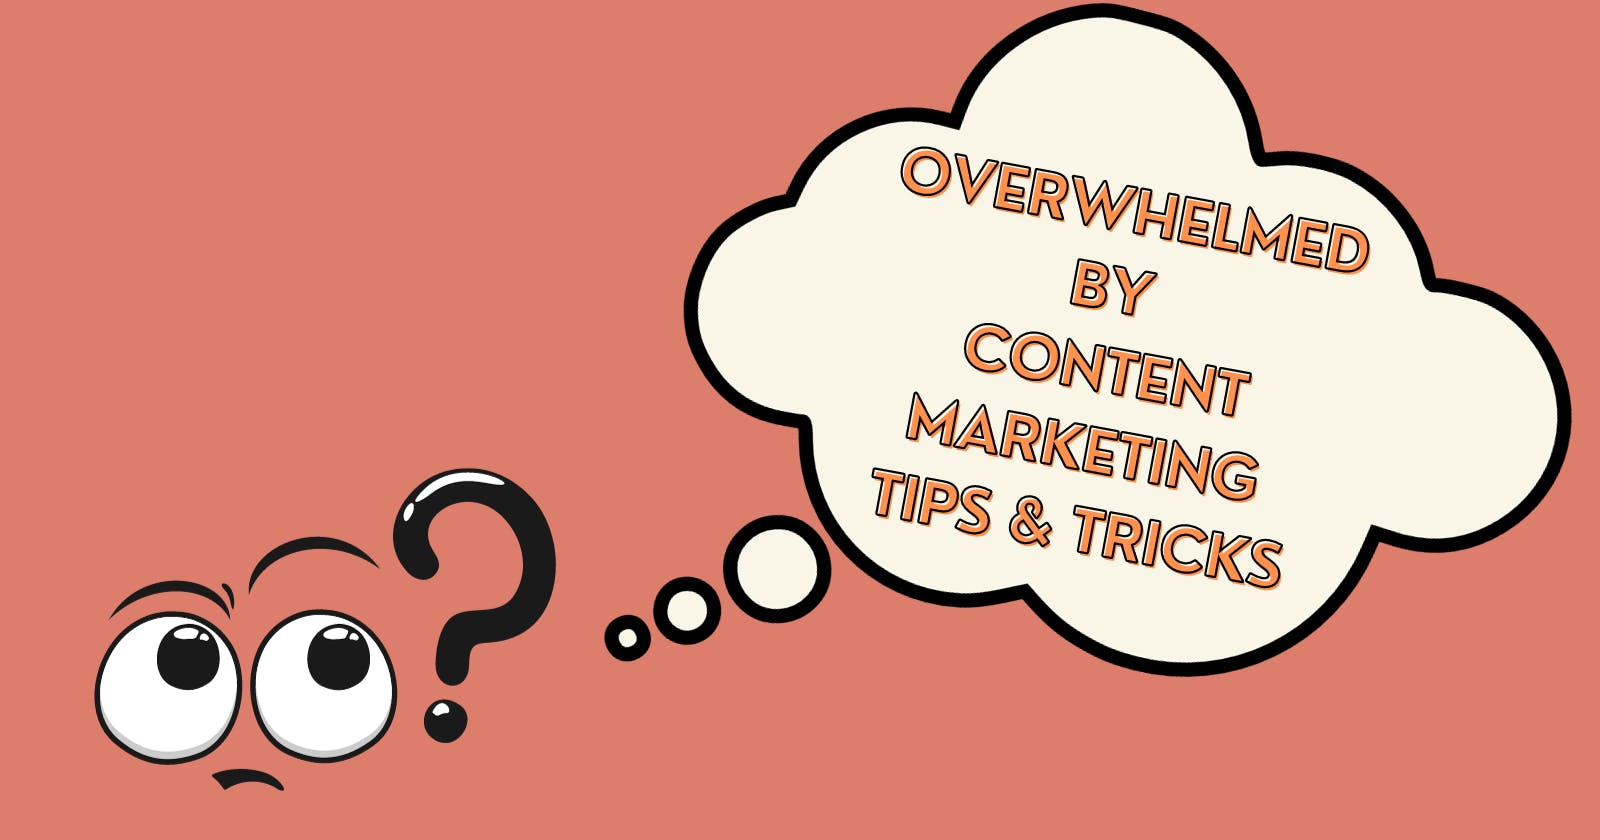 Overwhelmed by content marketing tips?